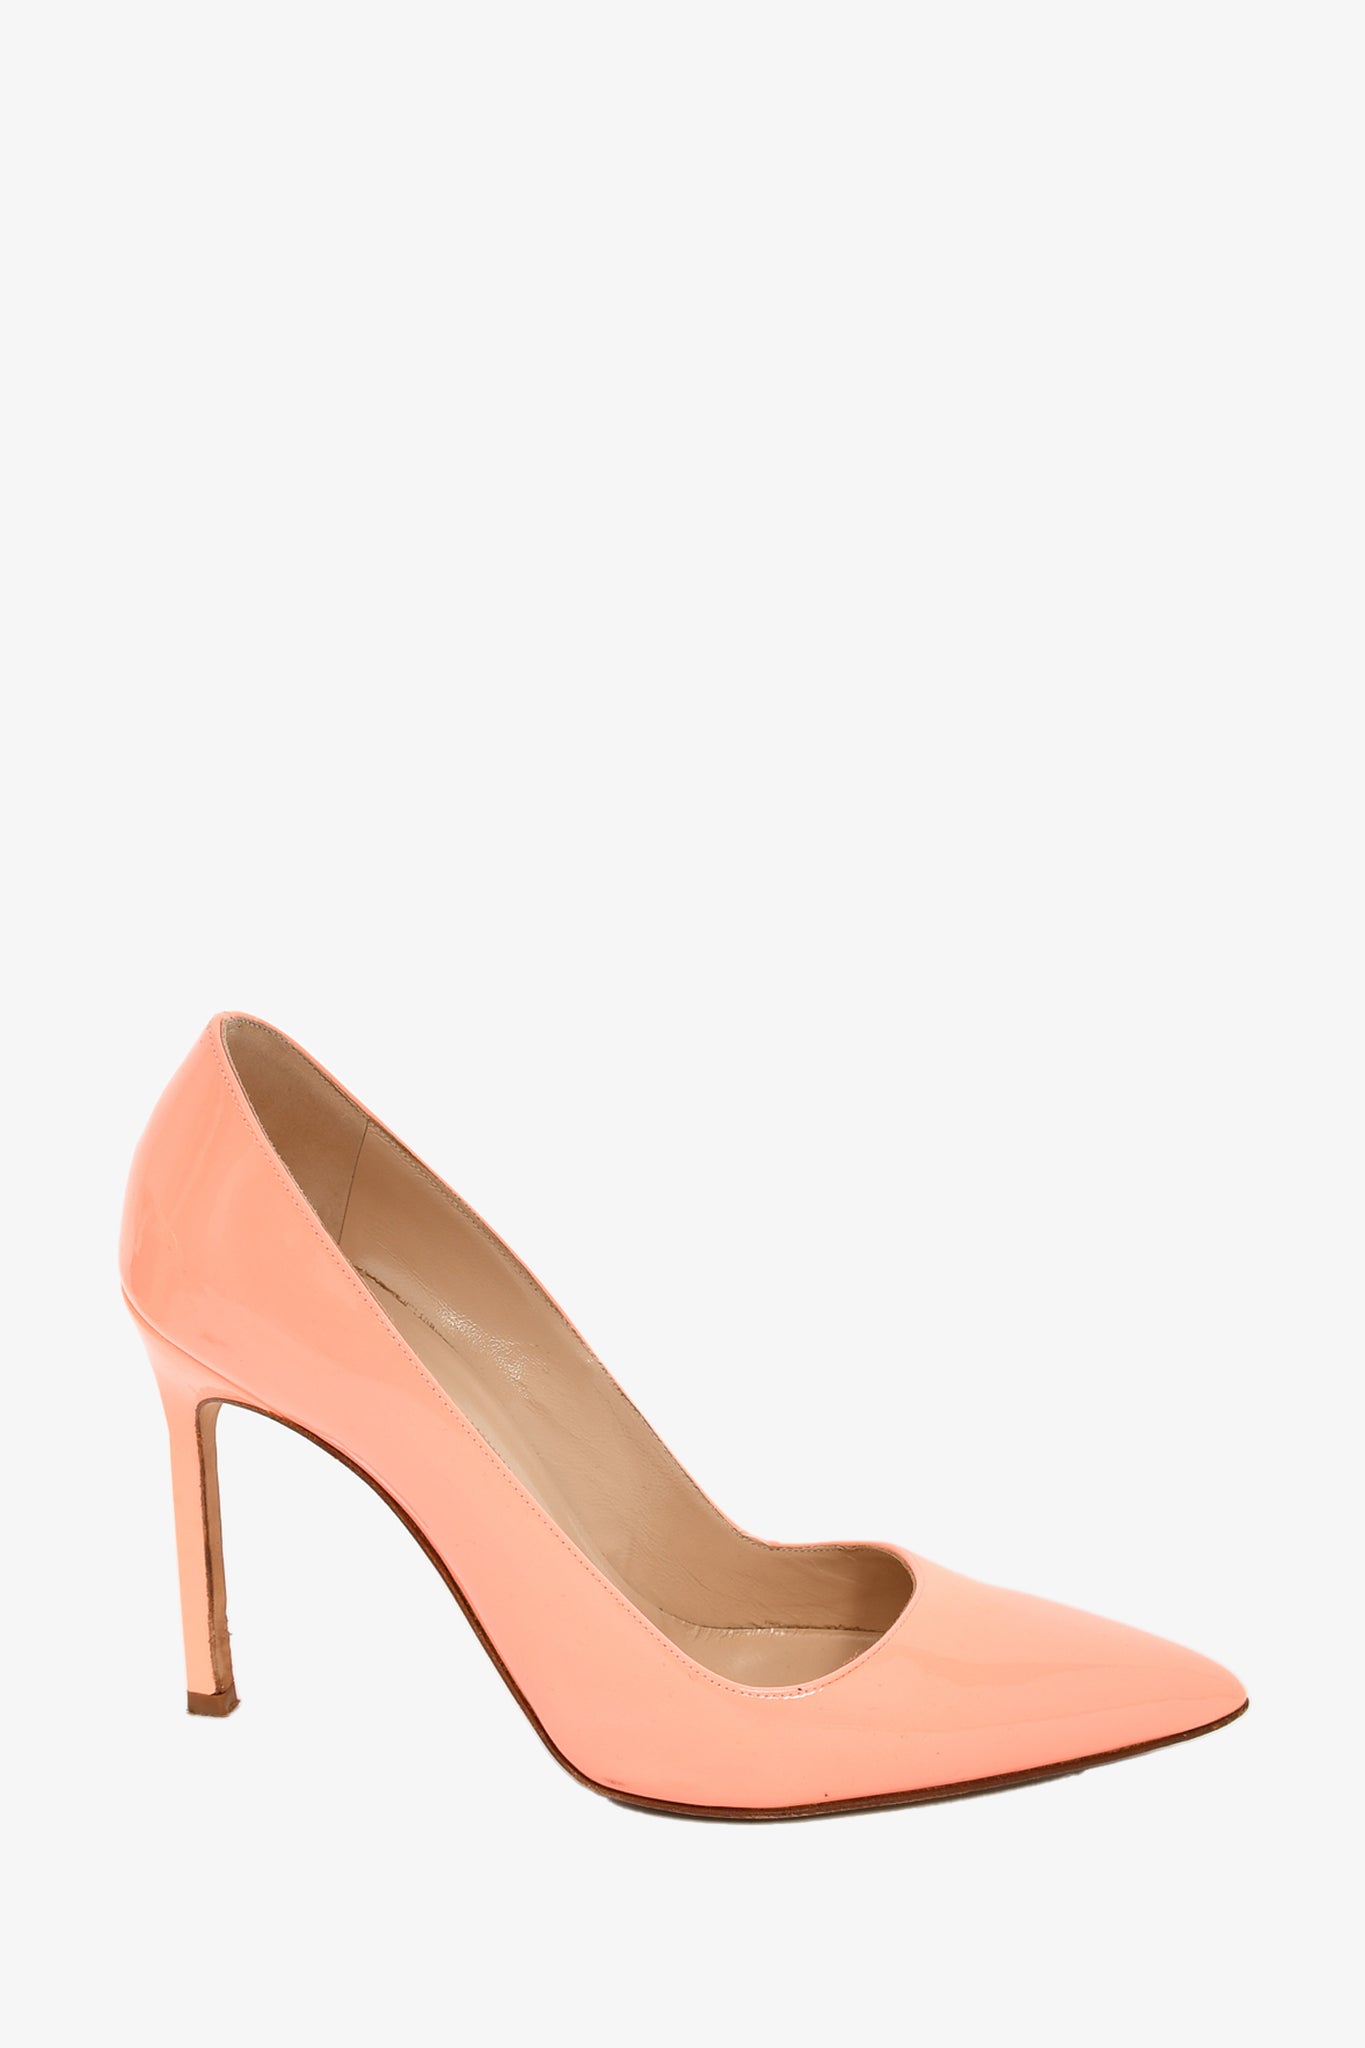 Manolo Blahnik Coral Patent Heels Size 35 – Mine & Yours